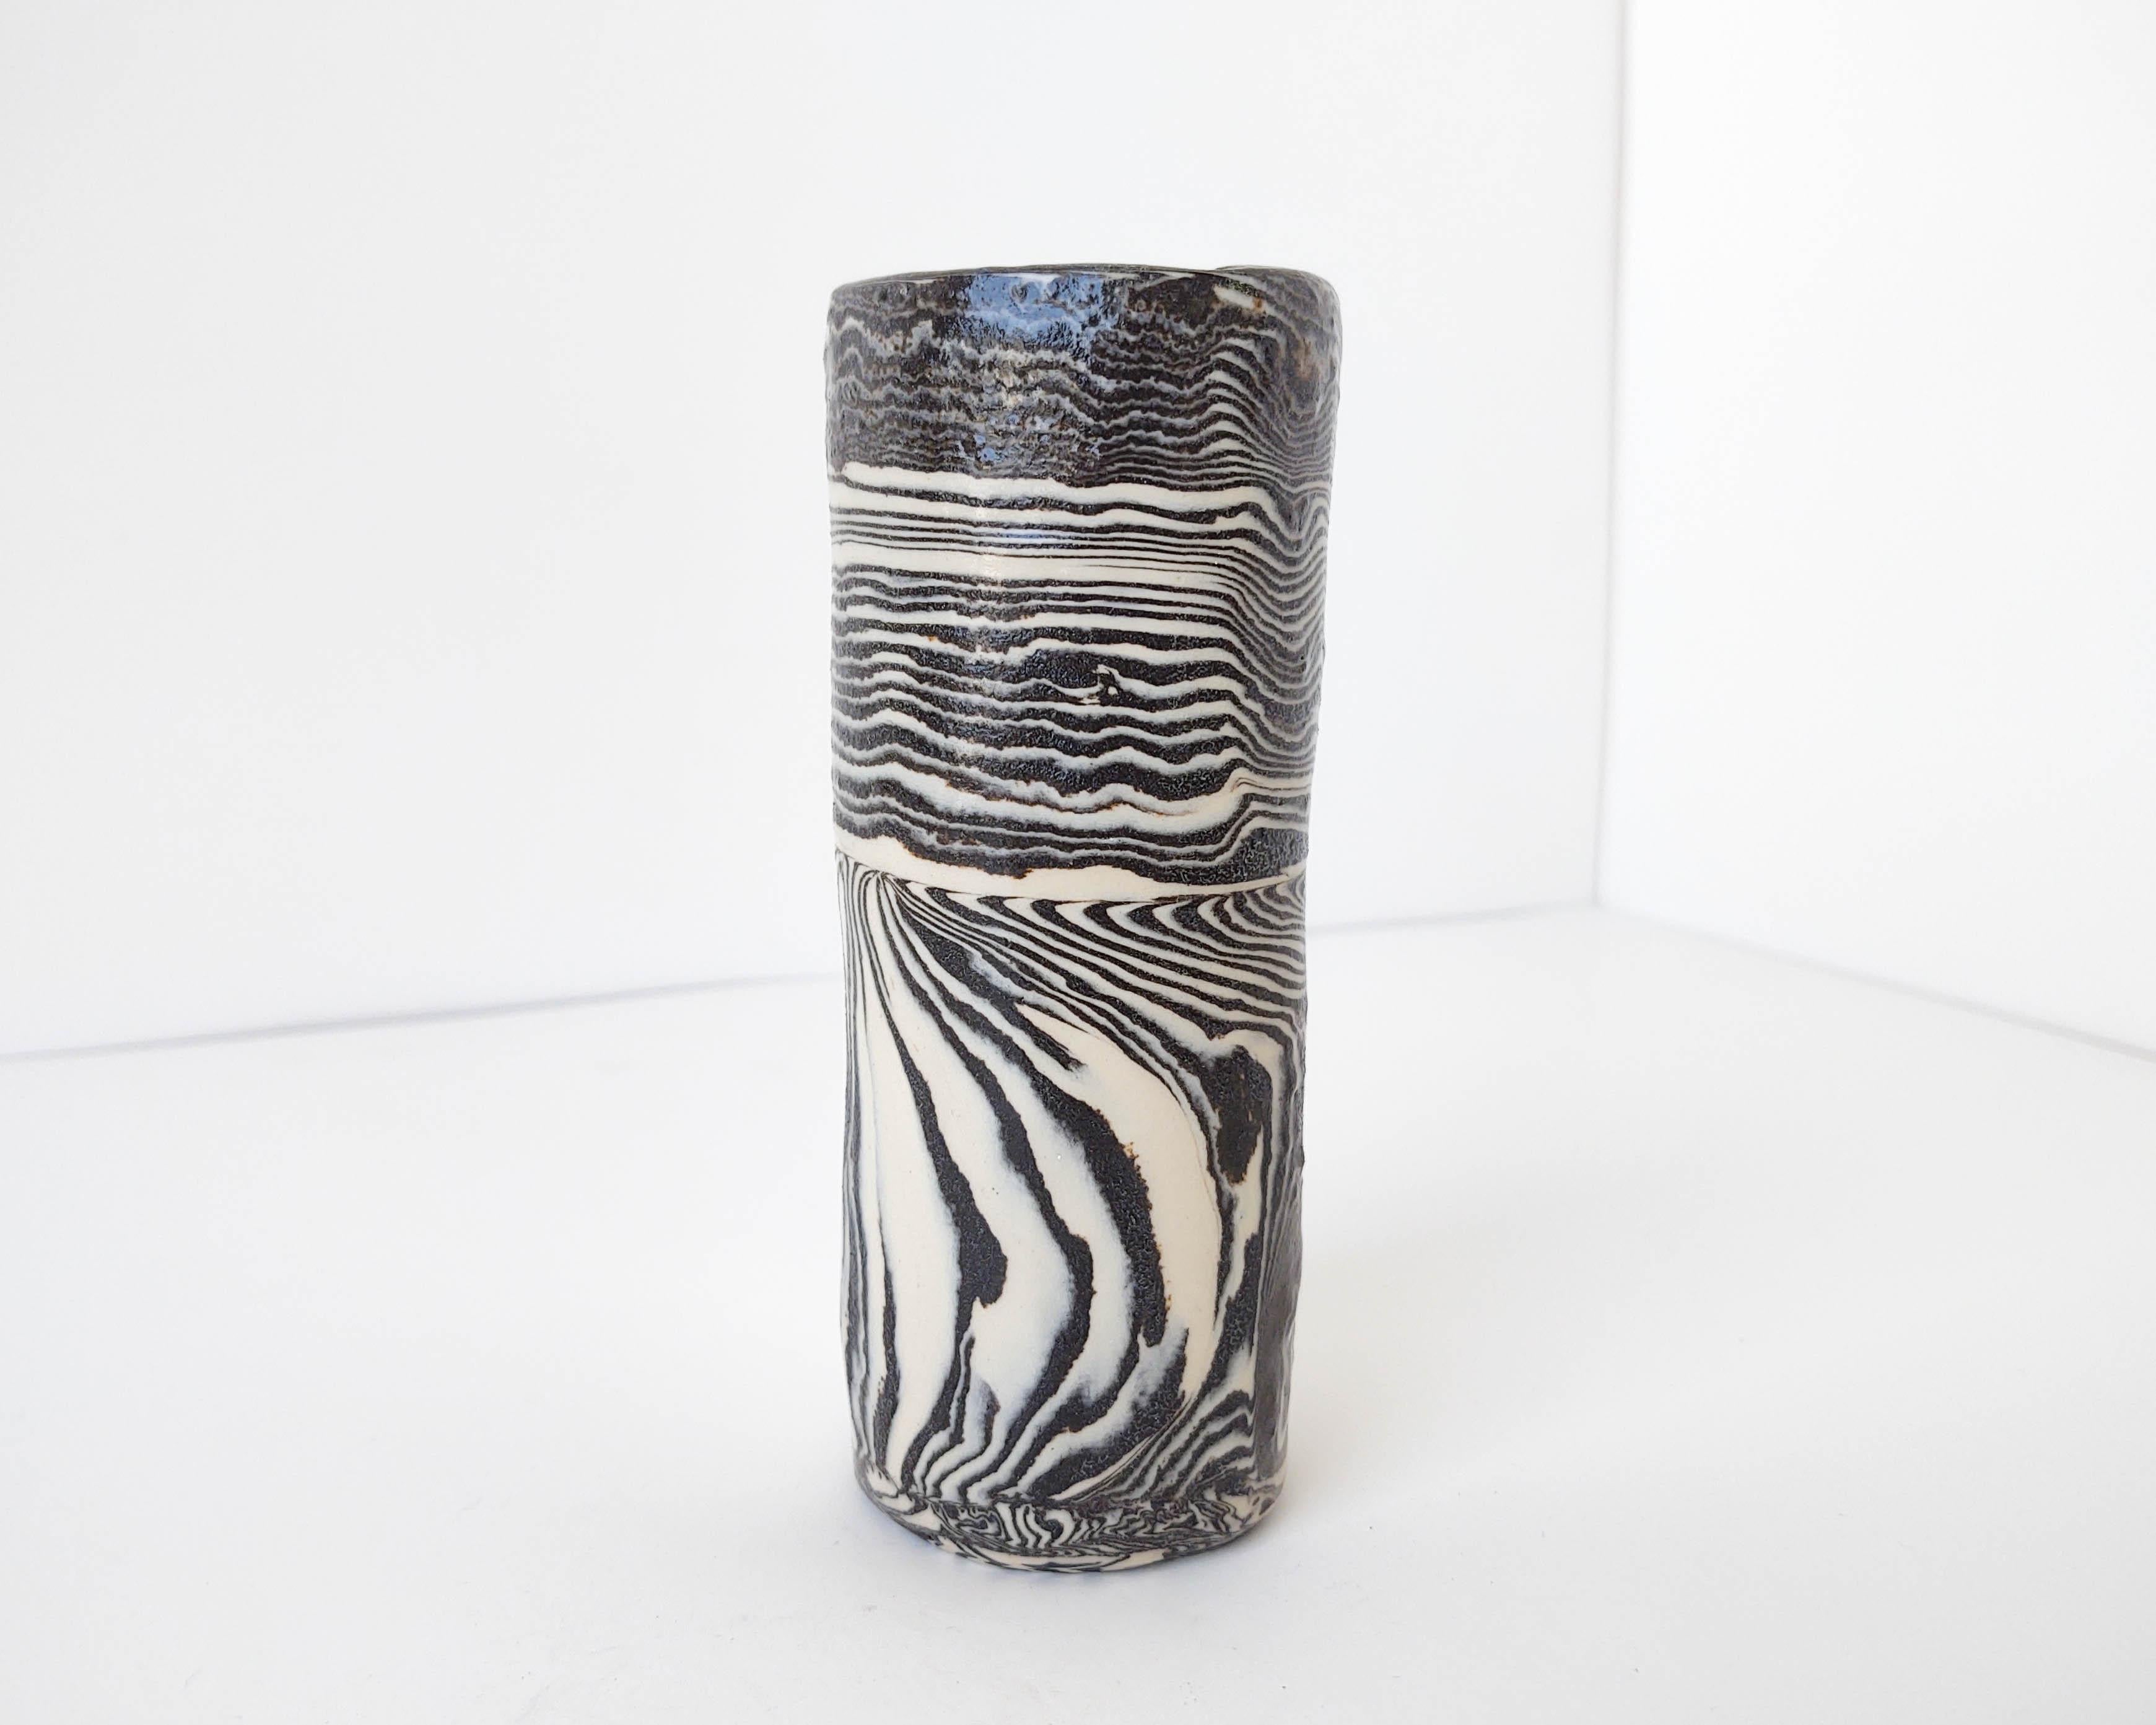 American Handmade Small Psychedelic Nerikomi Black and White Vase by Fizzy Ceramics